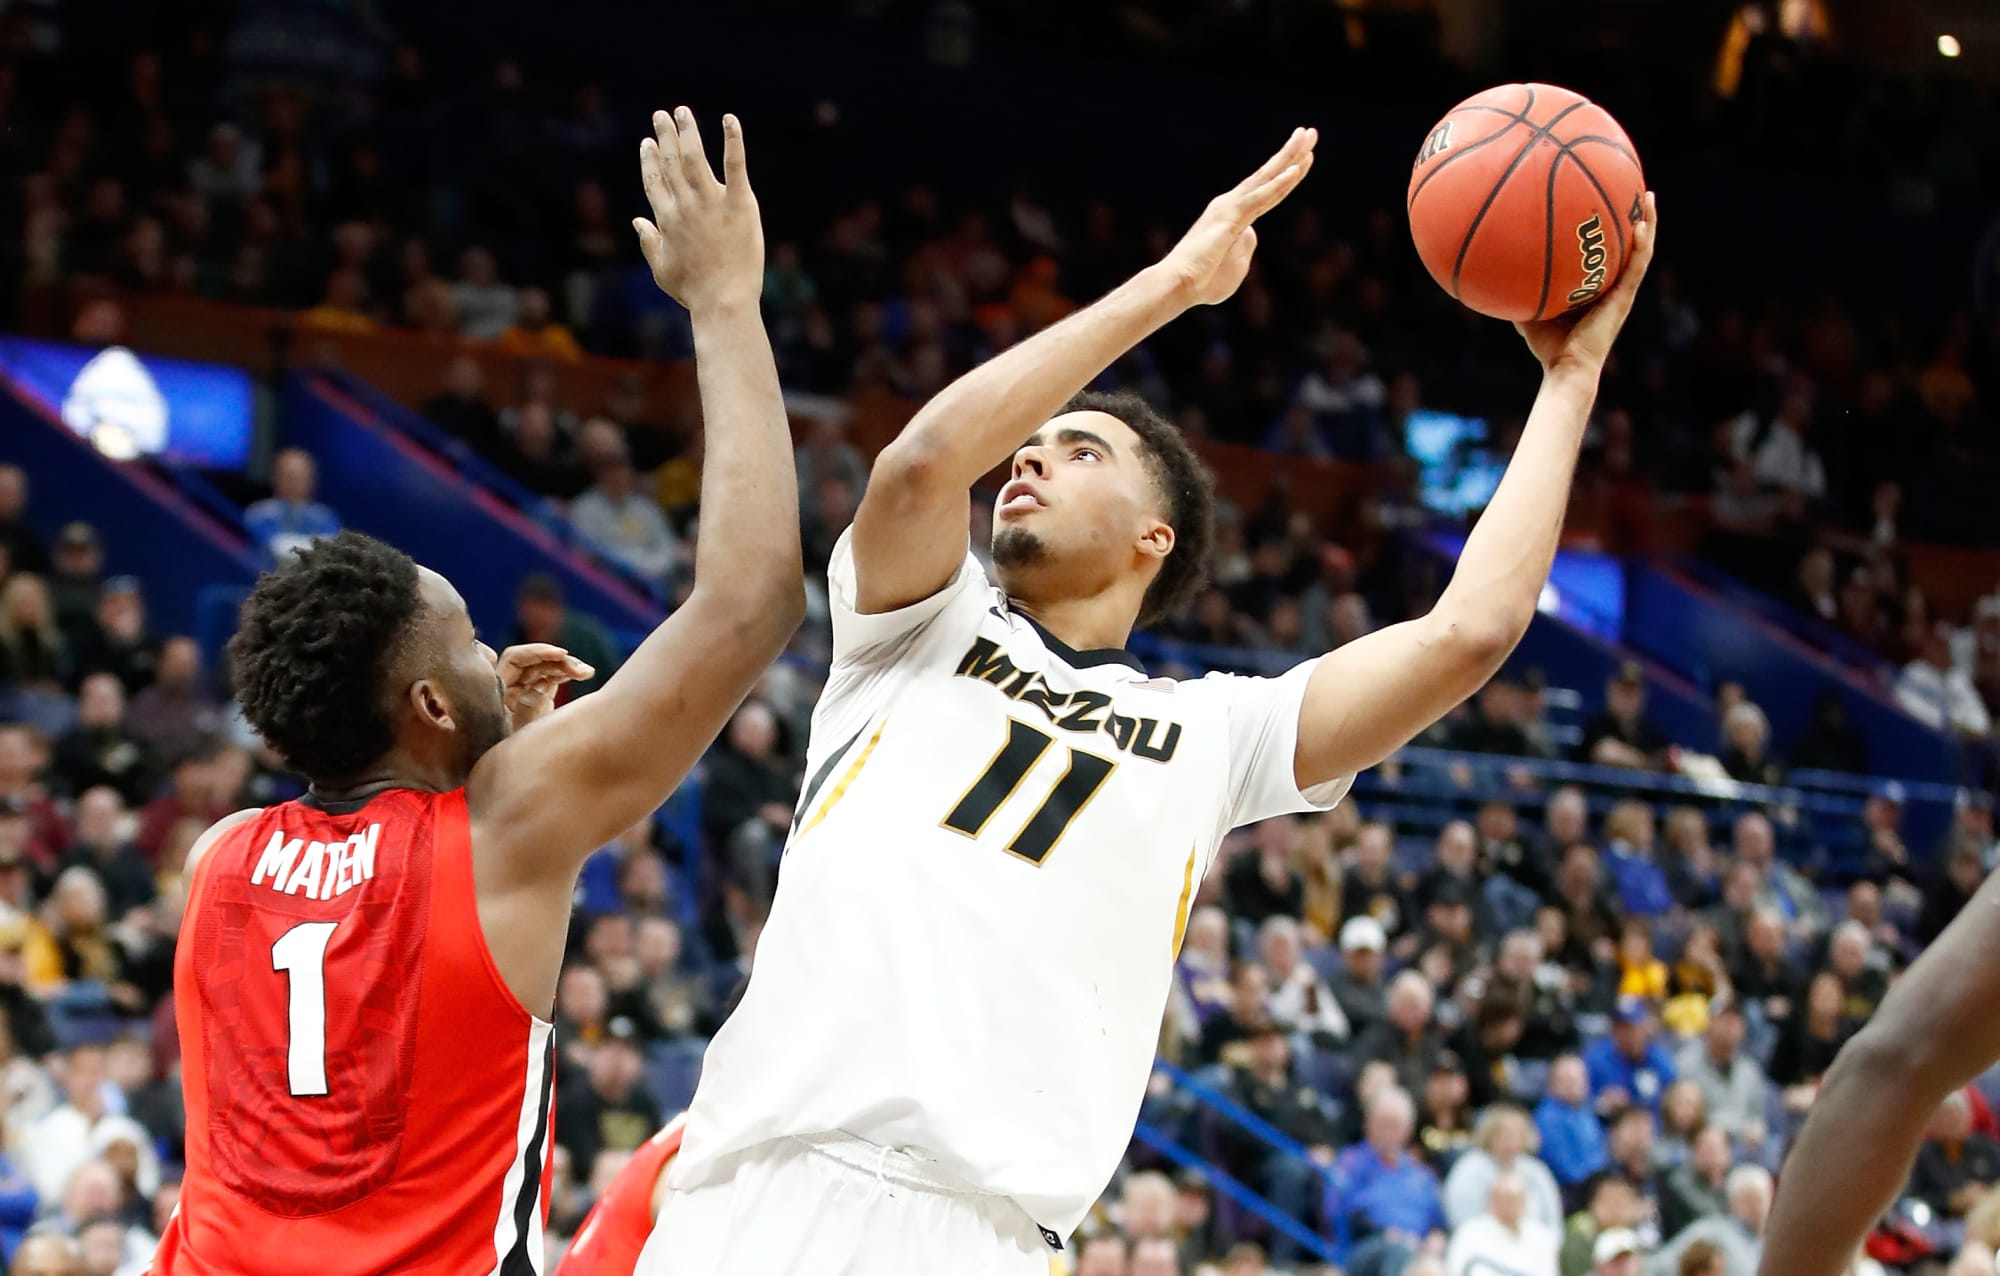 Missouri Basketball Tigers open up tournament play against Florida State